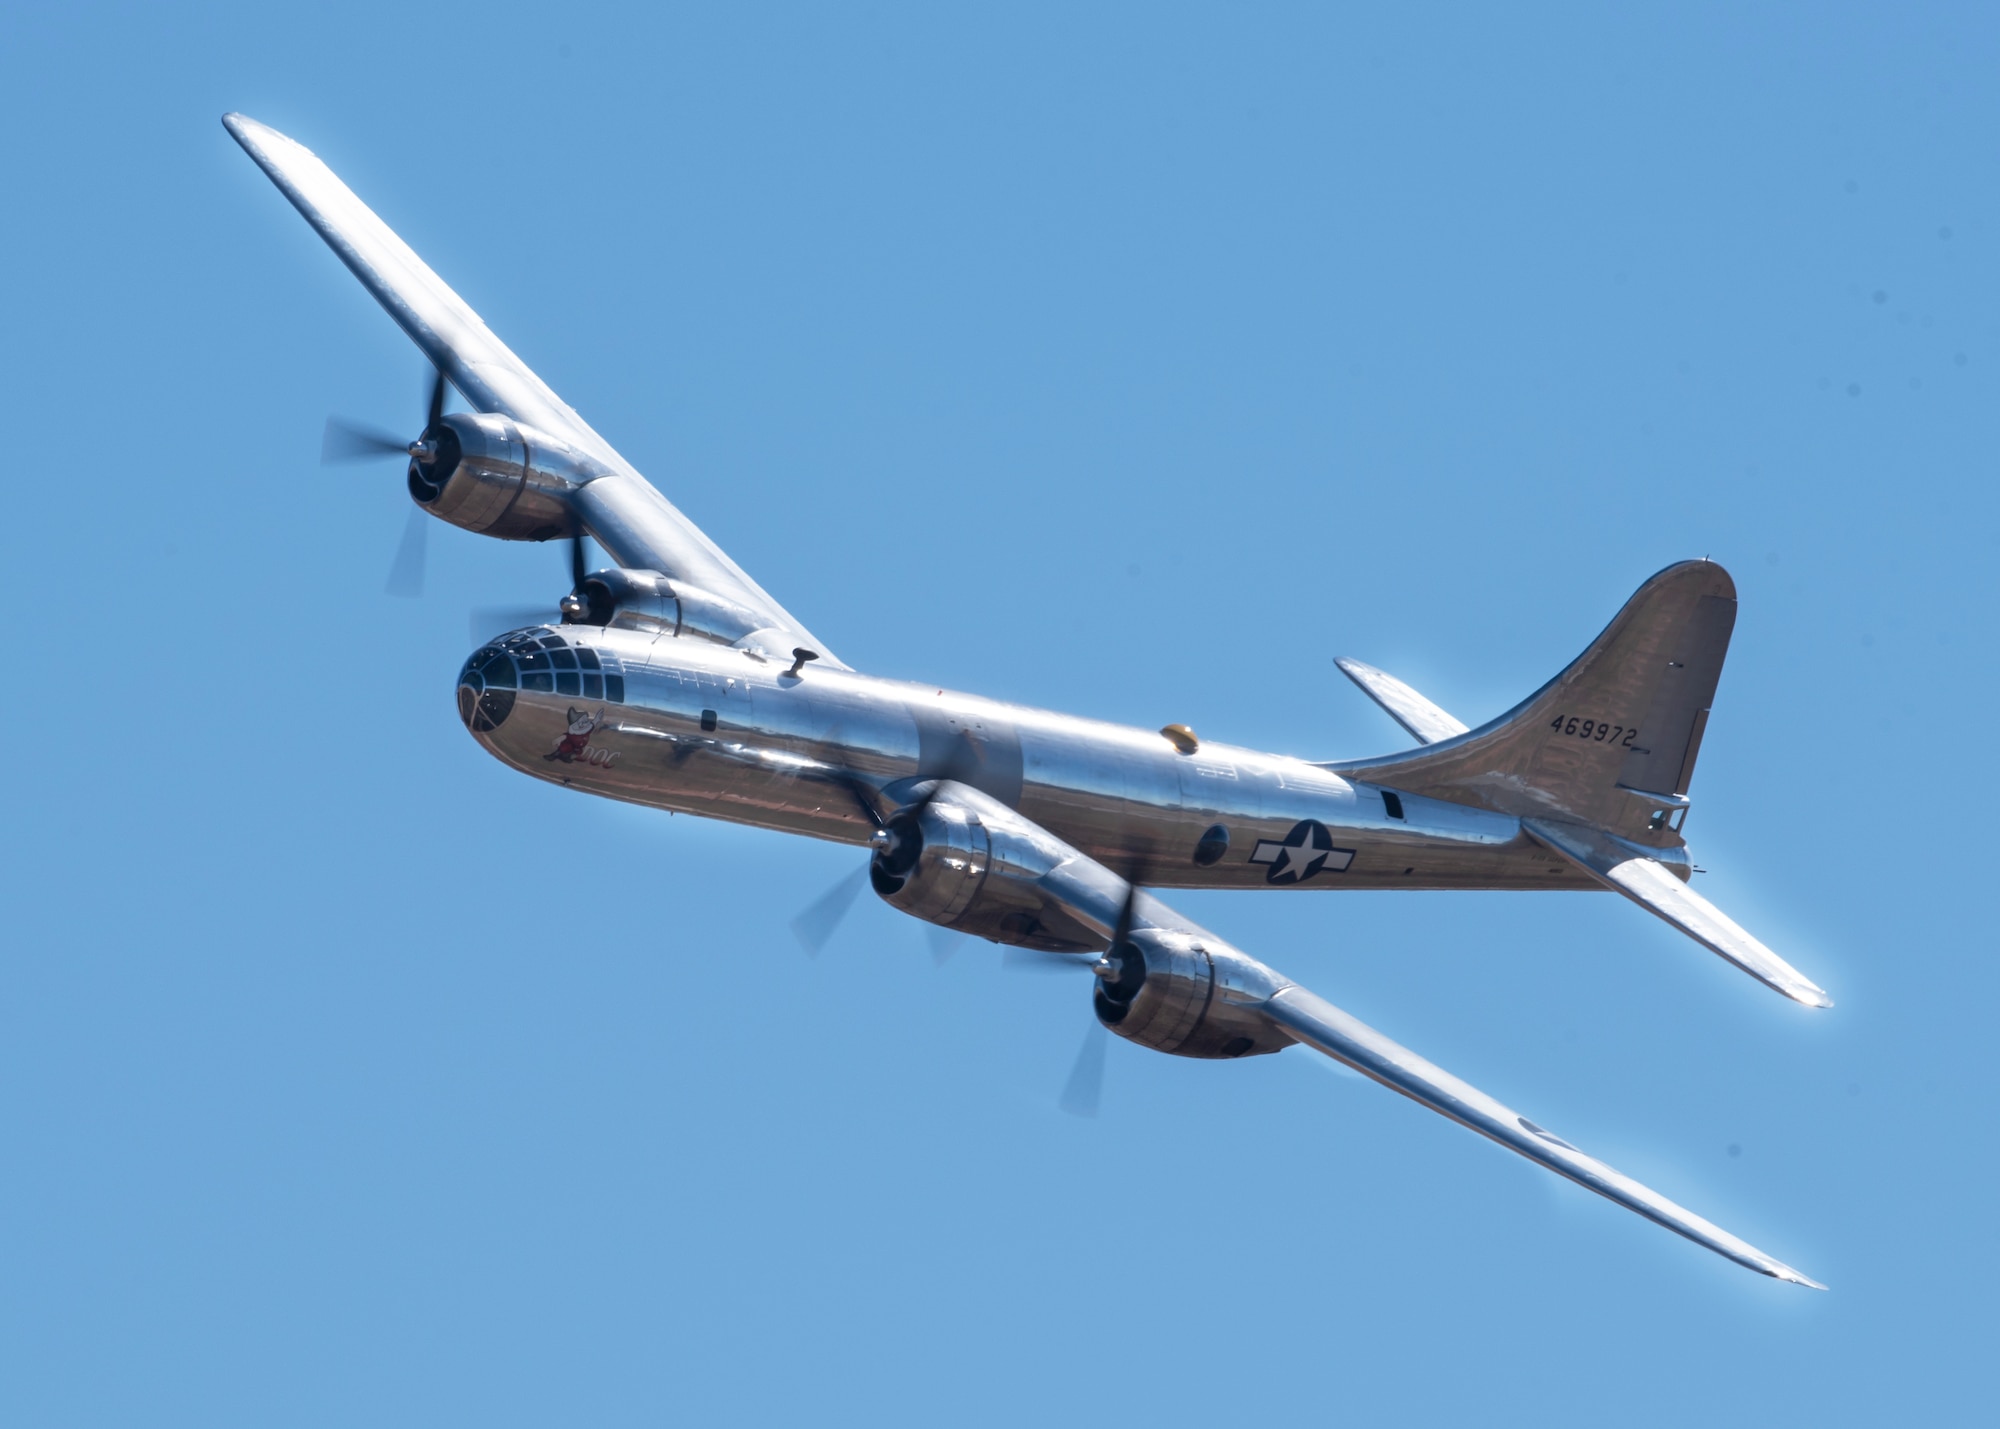 Doc's B-29 Superfortress performs at the Sheppard Air Force Base Guardians of Freedom Open House and Air Show at Sheppard AFB, Texas, Oct. 26, 2019. Doc is one of the 1,644 B-29s manufactured in Wichita during World War II. Over the past 15-plus years, hundreds of volunteers have worked on Doc and the restoration project. (U.S. Air Force photo by Airman 1st Class Pedro Tenorio)